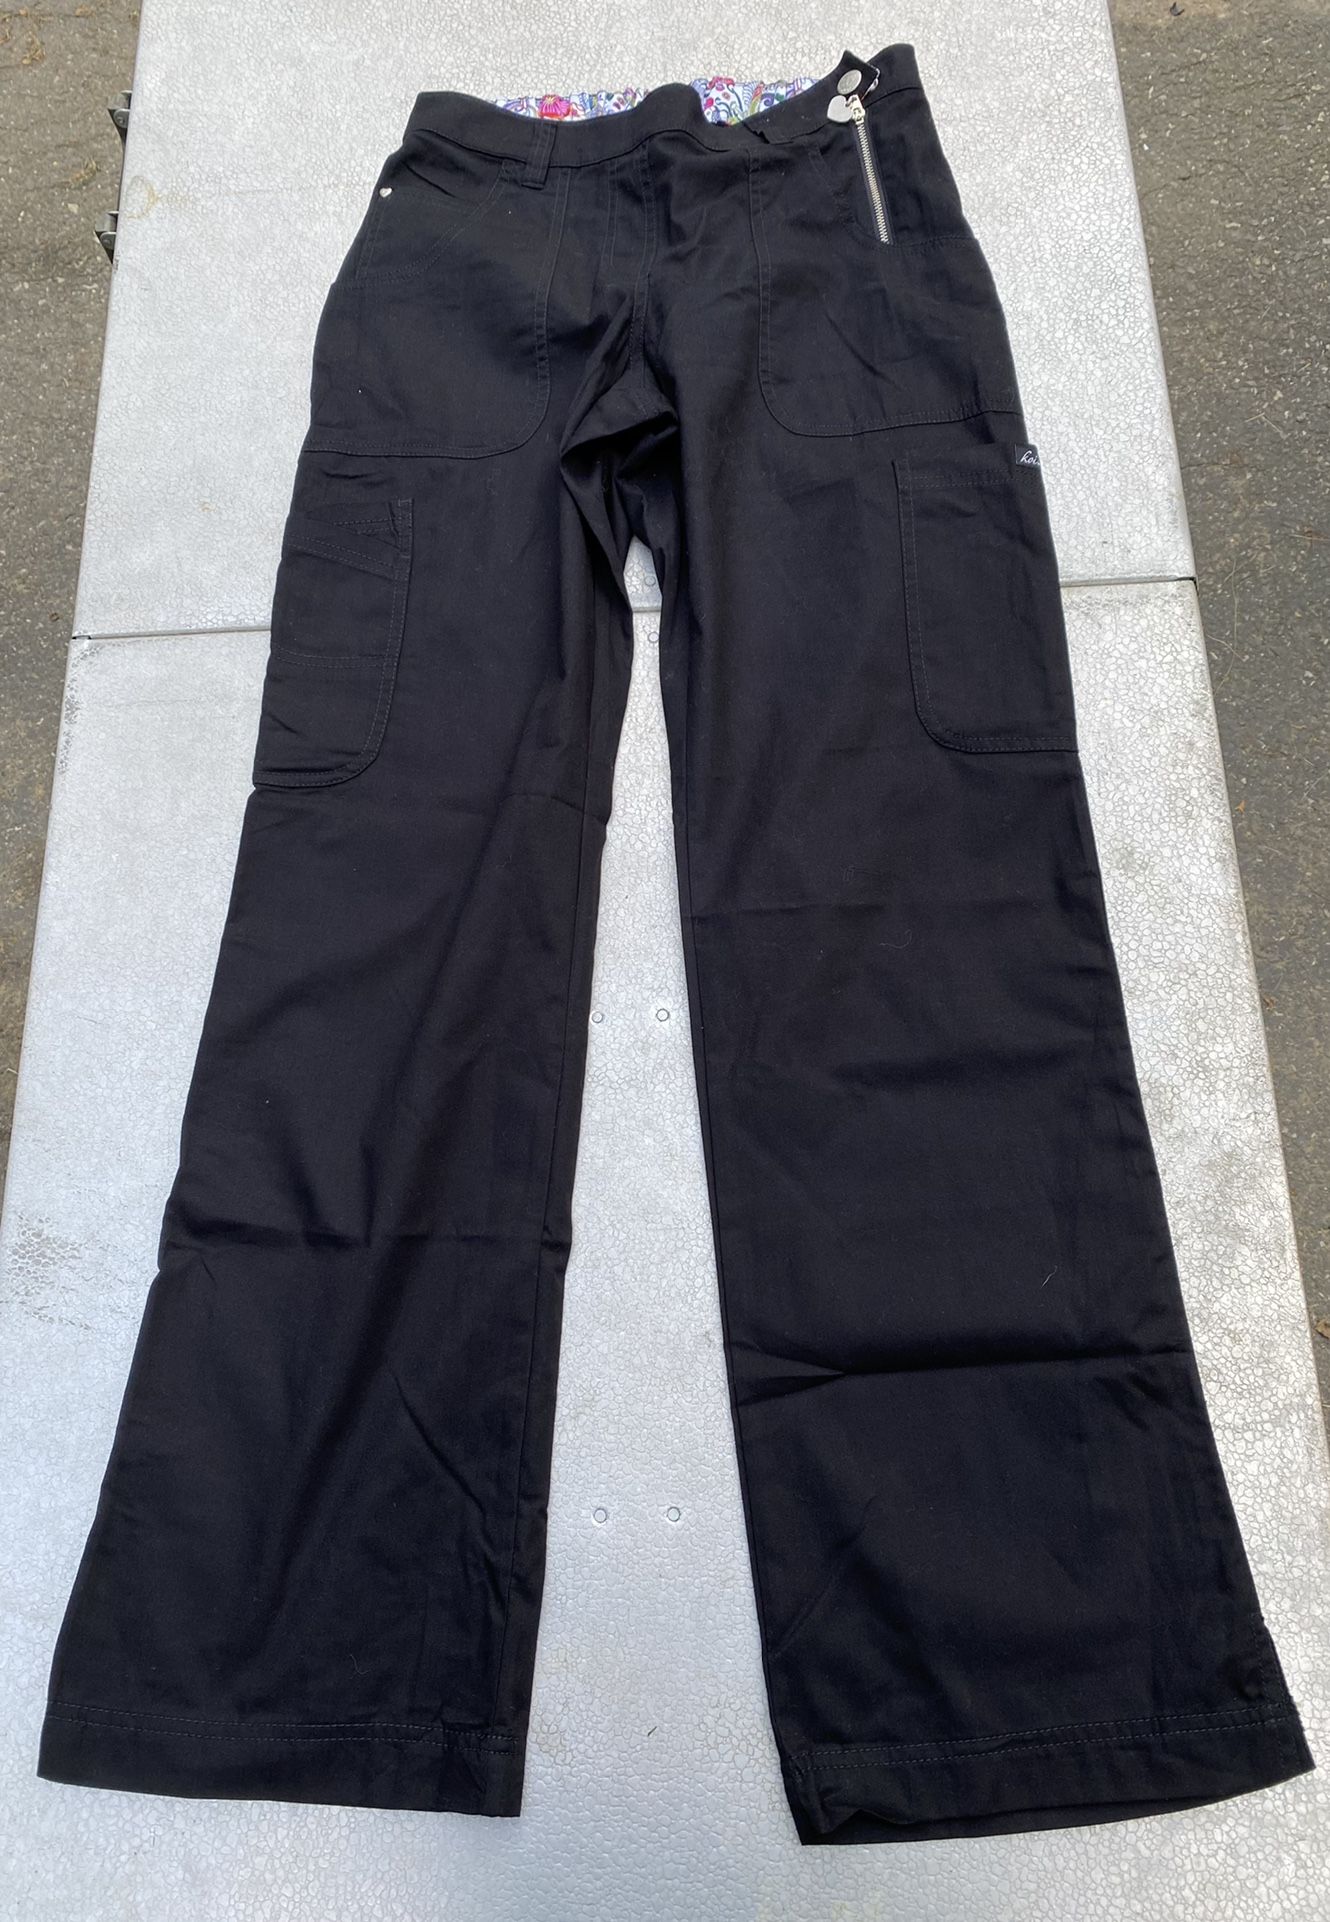 BRAND NEW: Black Pants size SMALL (scrubs, chef pants, everyday multi-use)